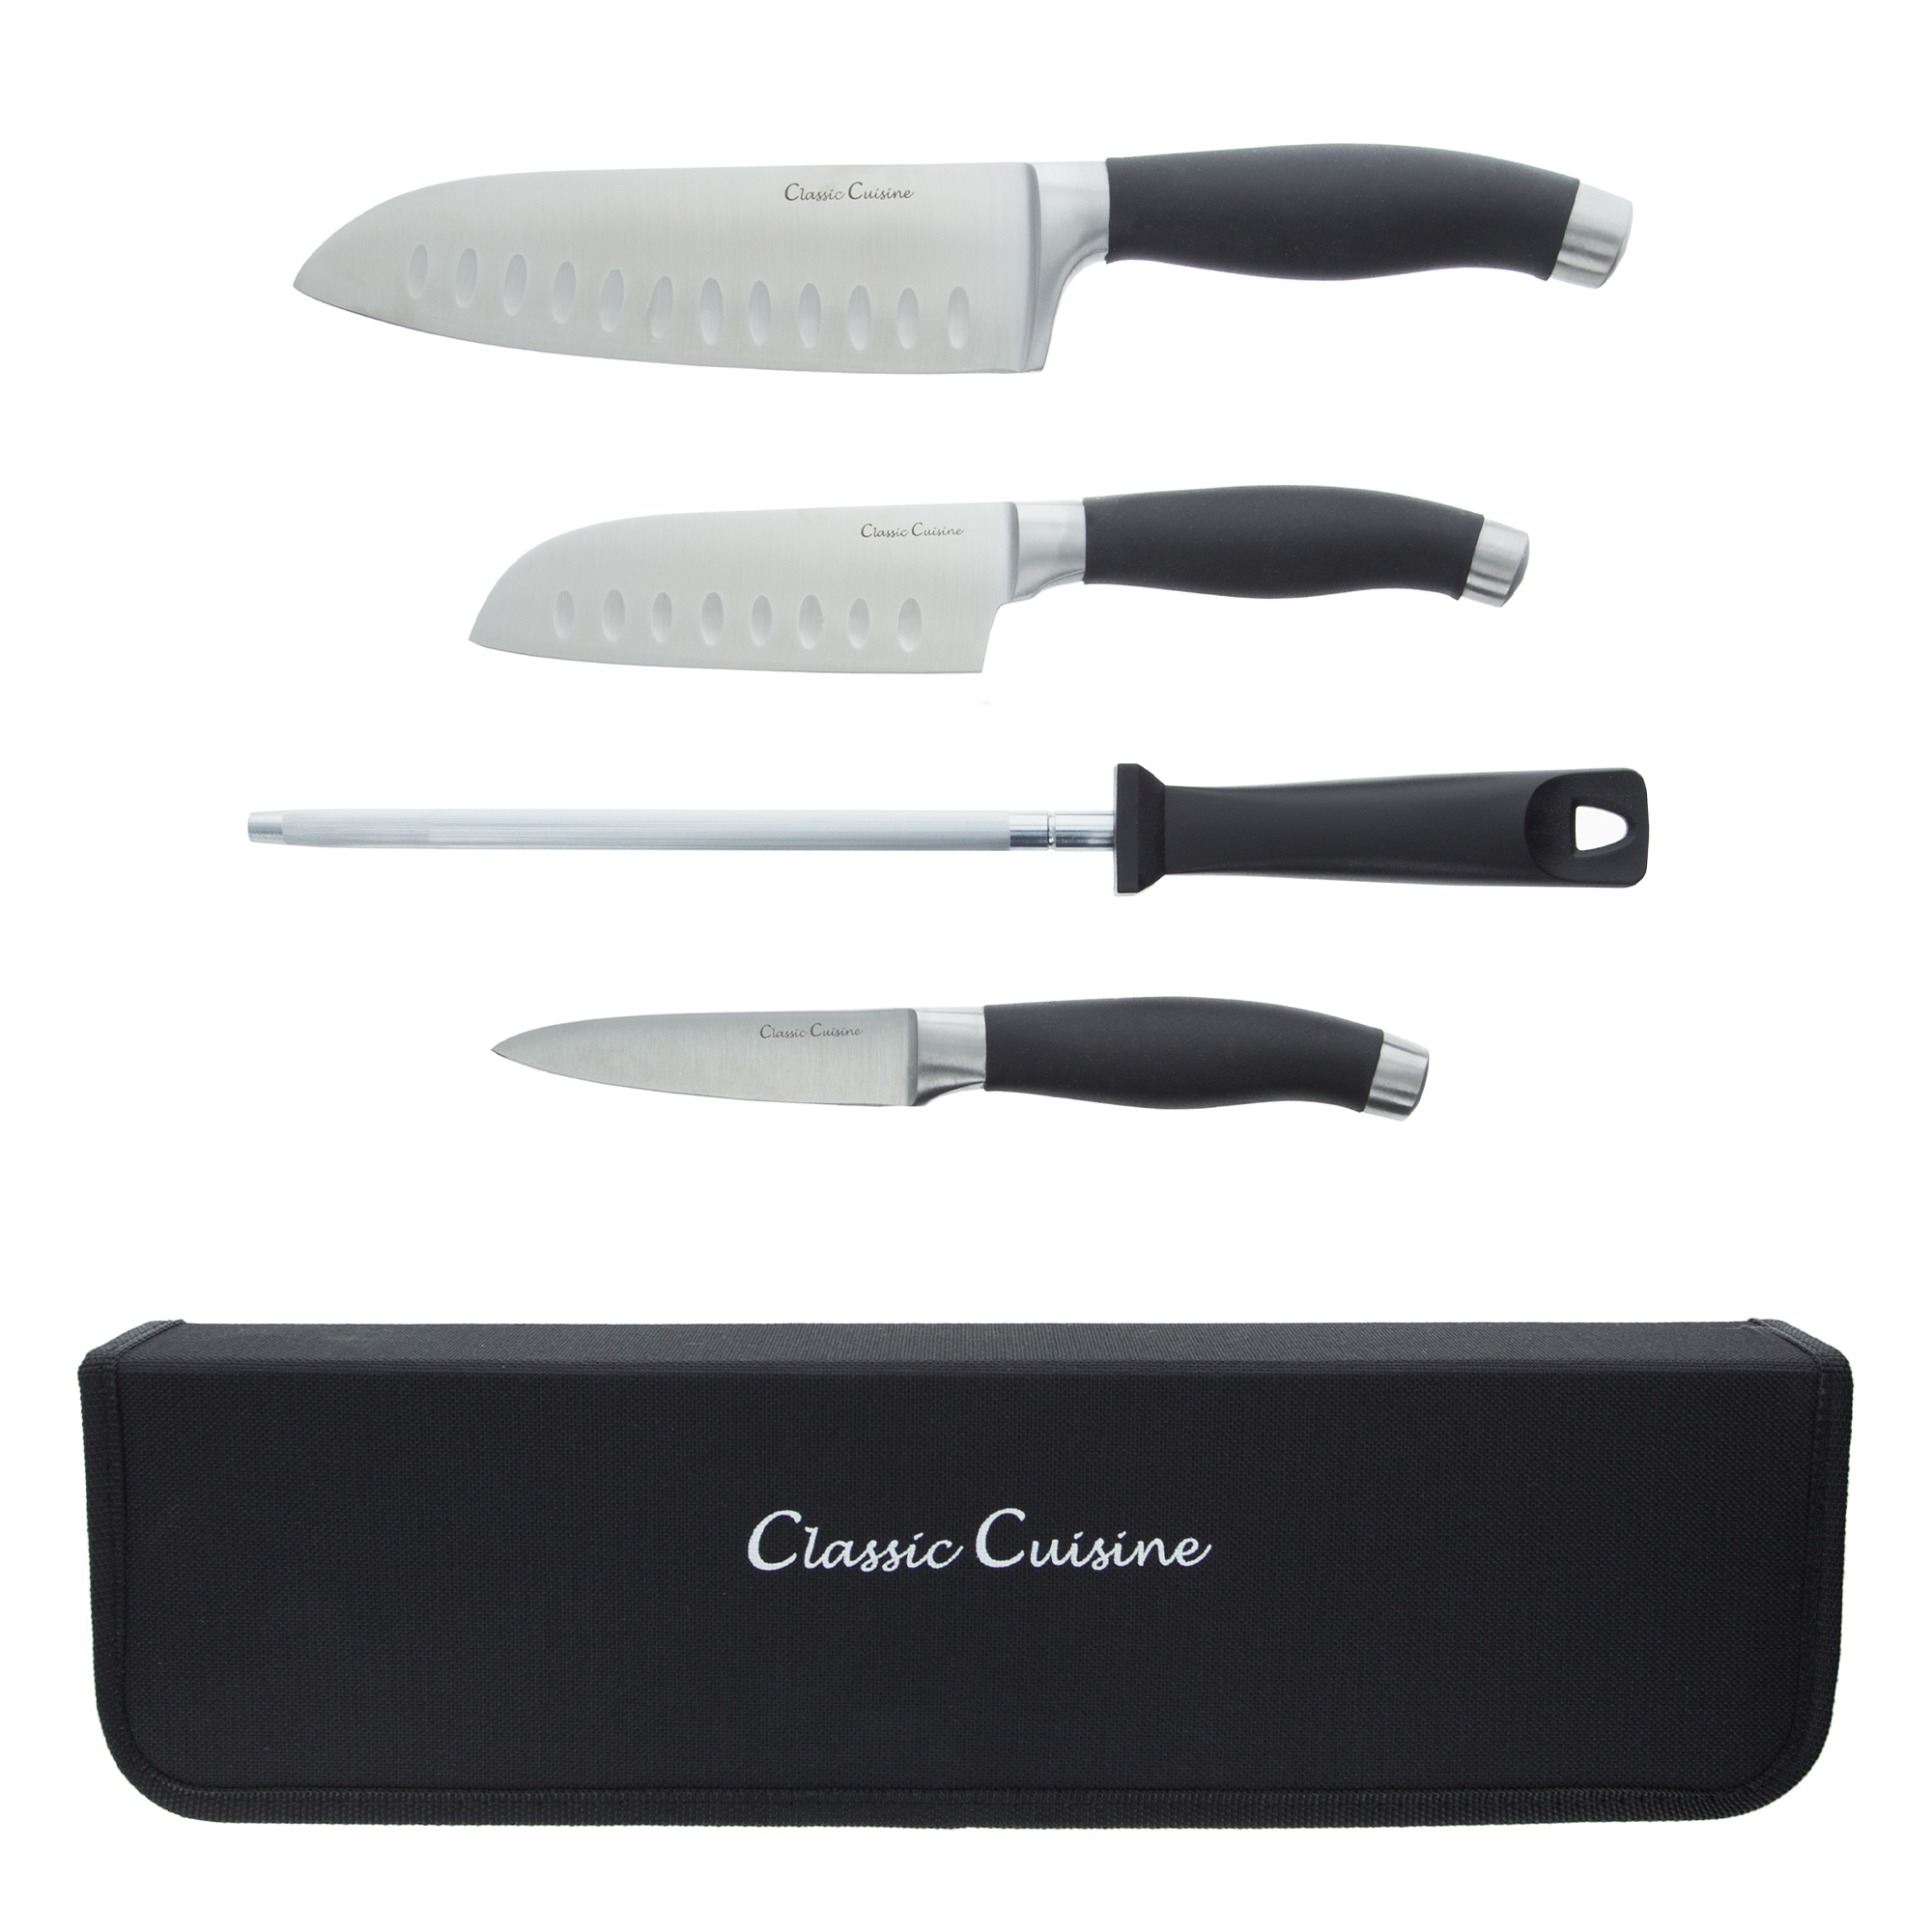 Professional Chef 5 Piece Knife Set, Stainless Steel Hand Forged Knives with Sharpening Steel and Zip Closure Storage Travel Bag